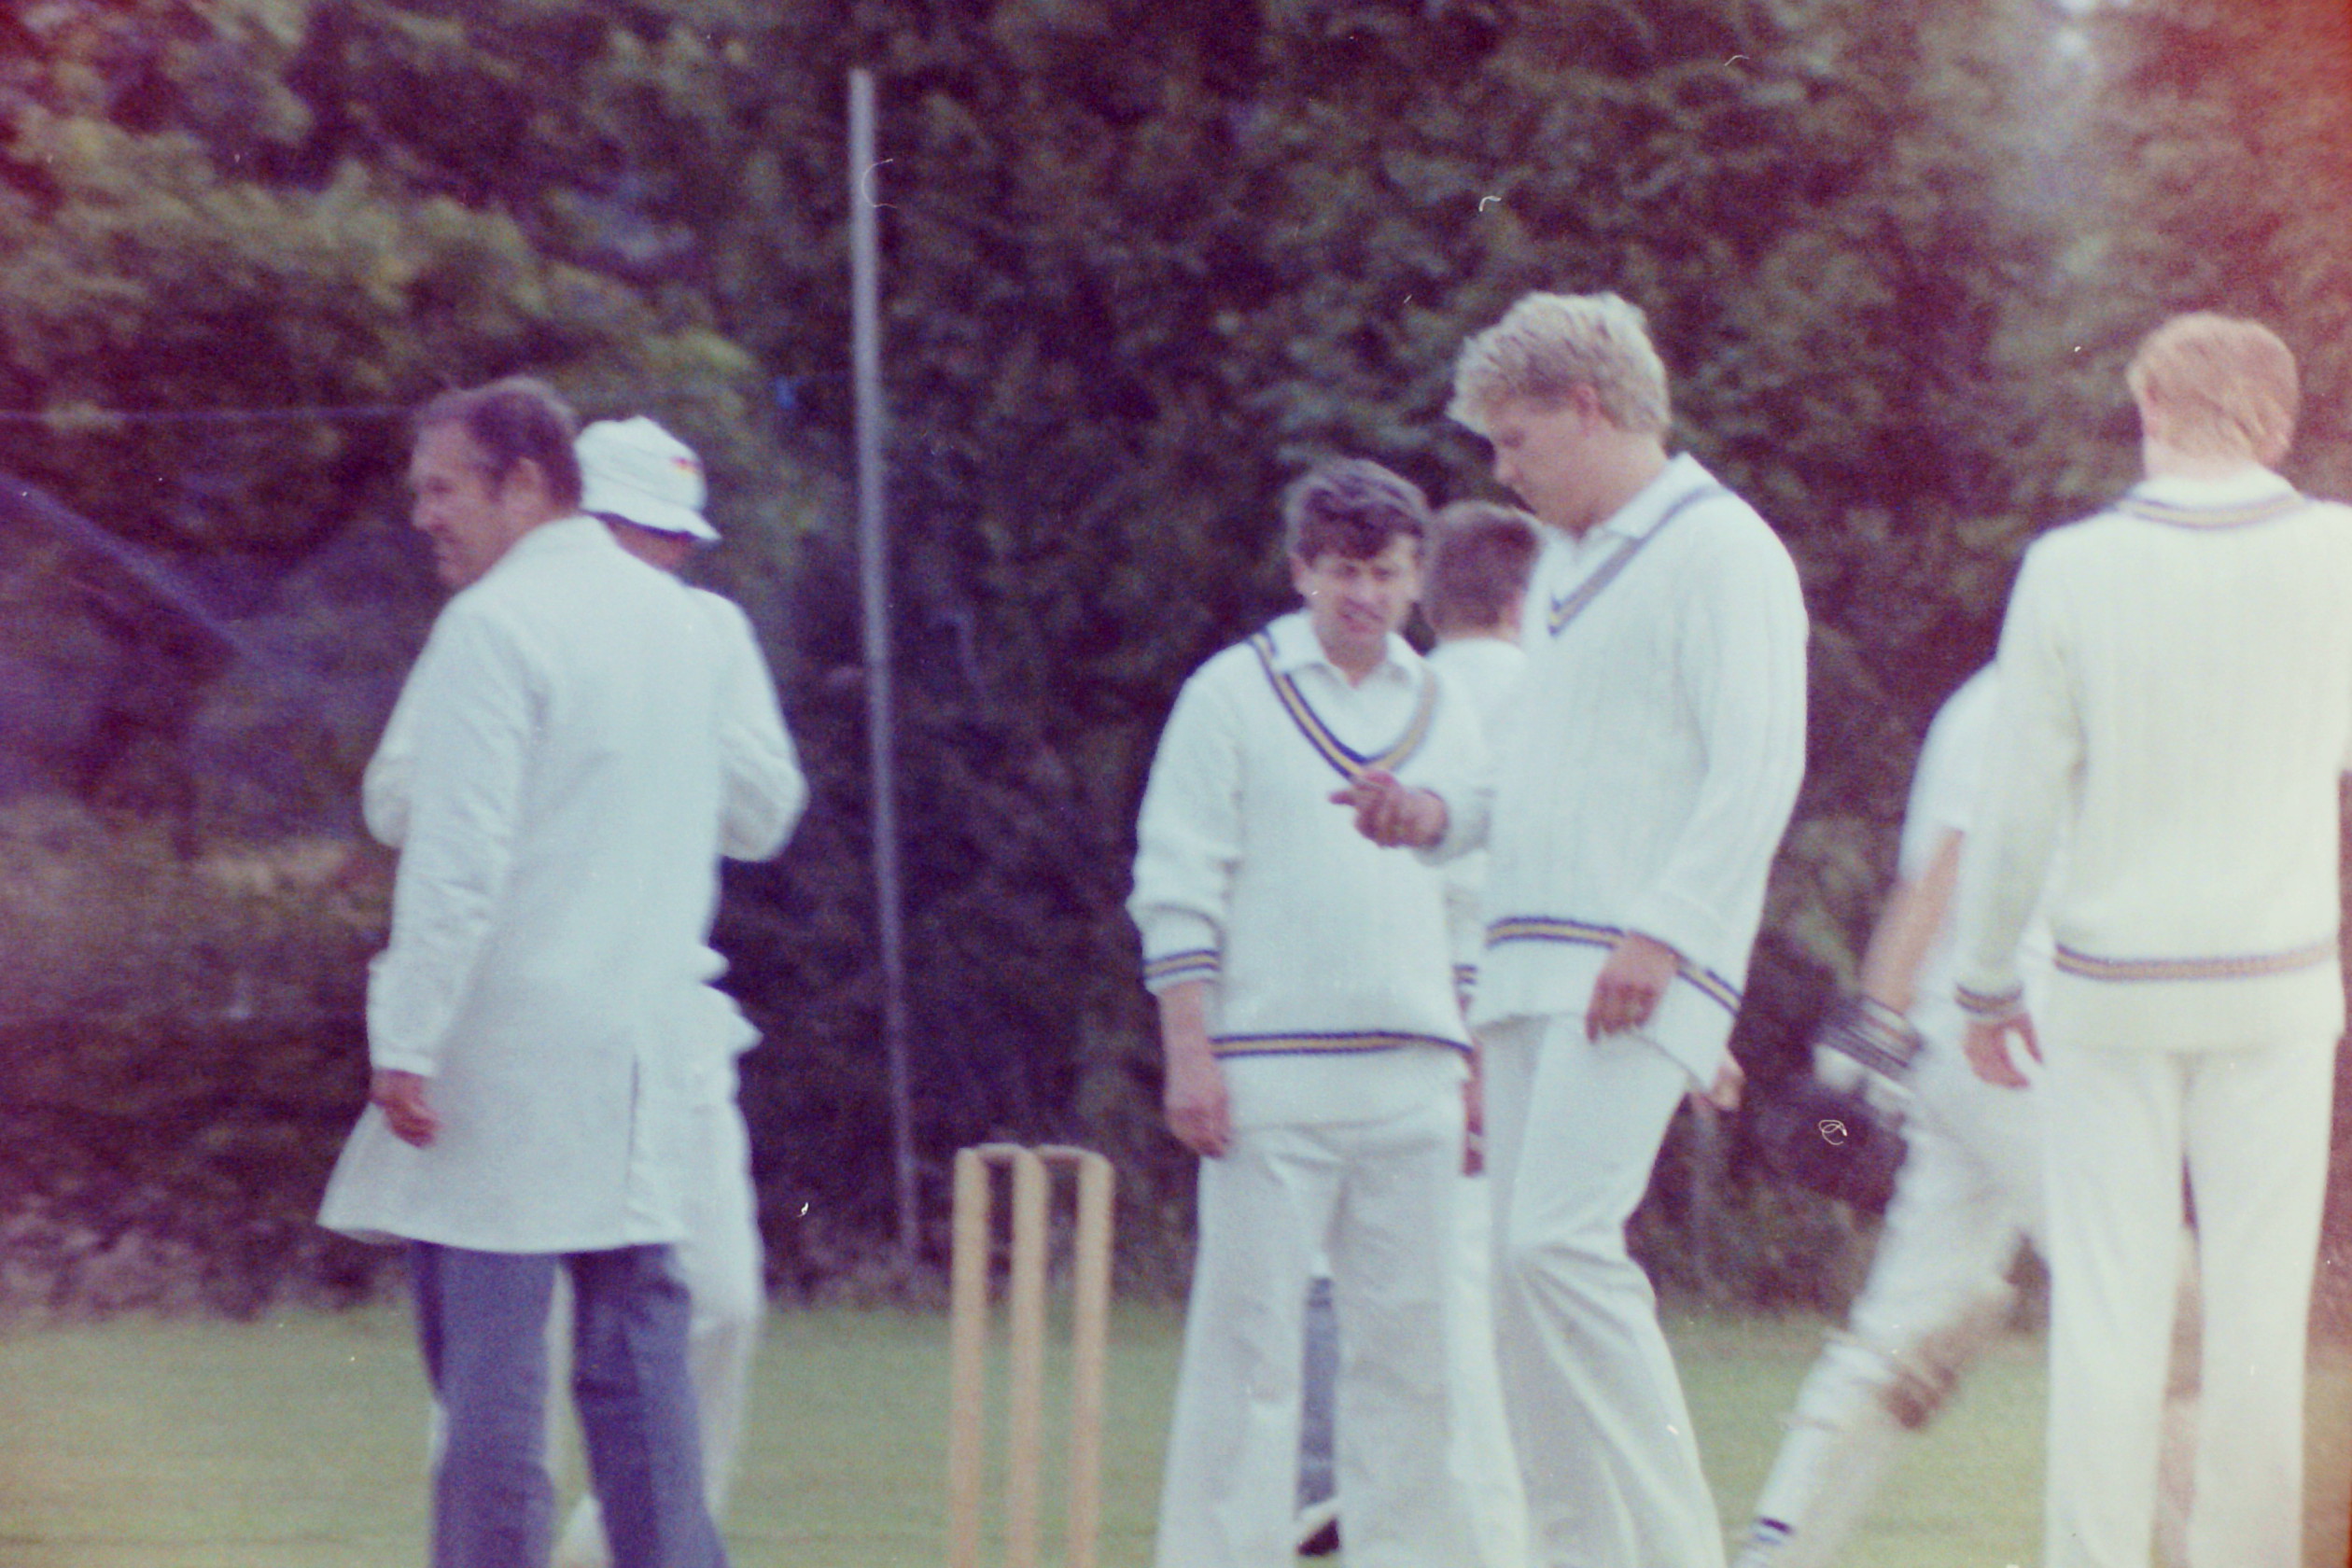 Another old cricket picture